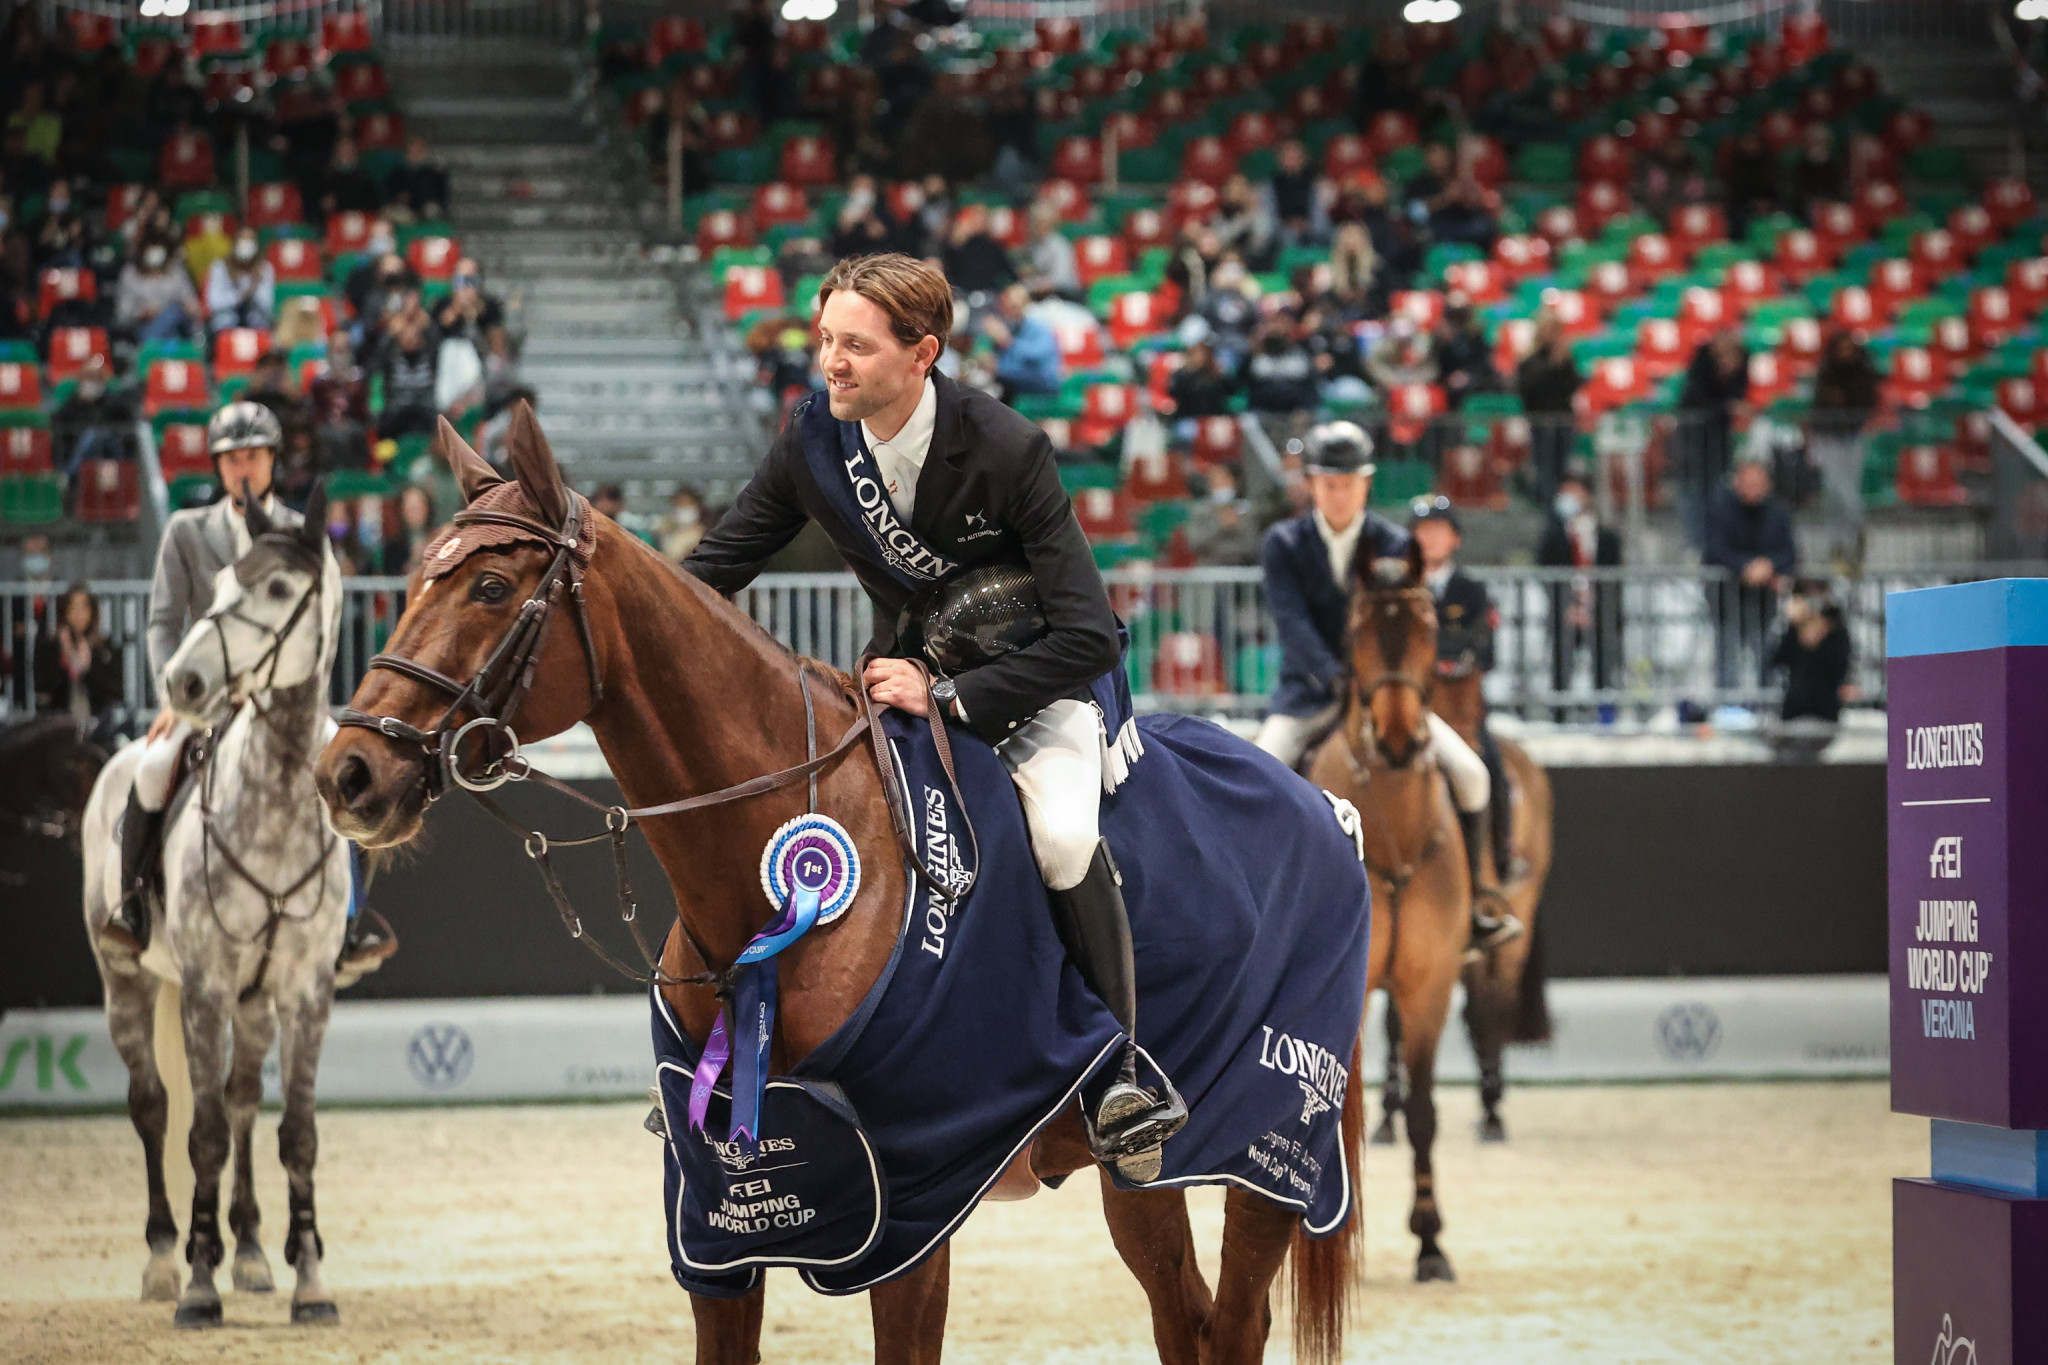 Simon Delestre celebrates with Hermes Ryan after triumphing in a 12 horse jump-off in Verona ©FEI/Massimo Argenziano